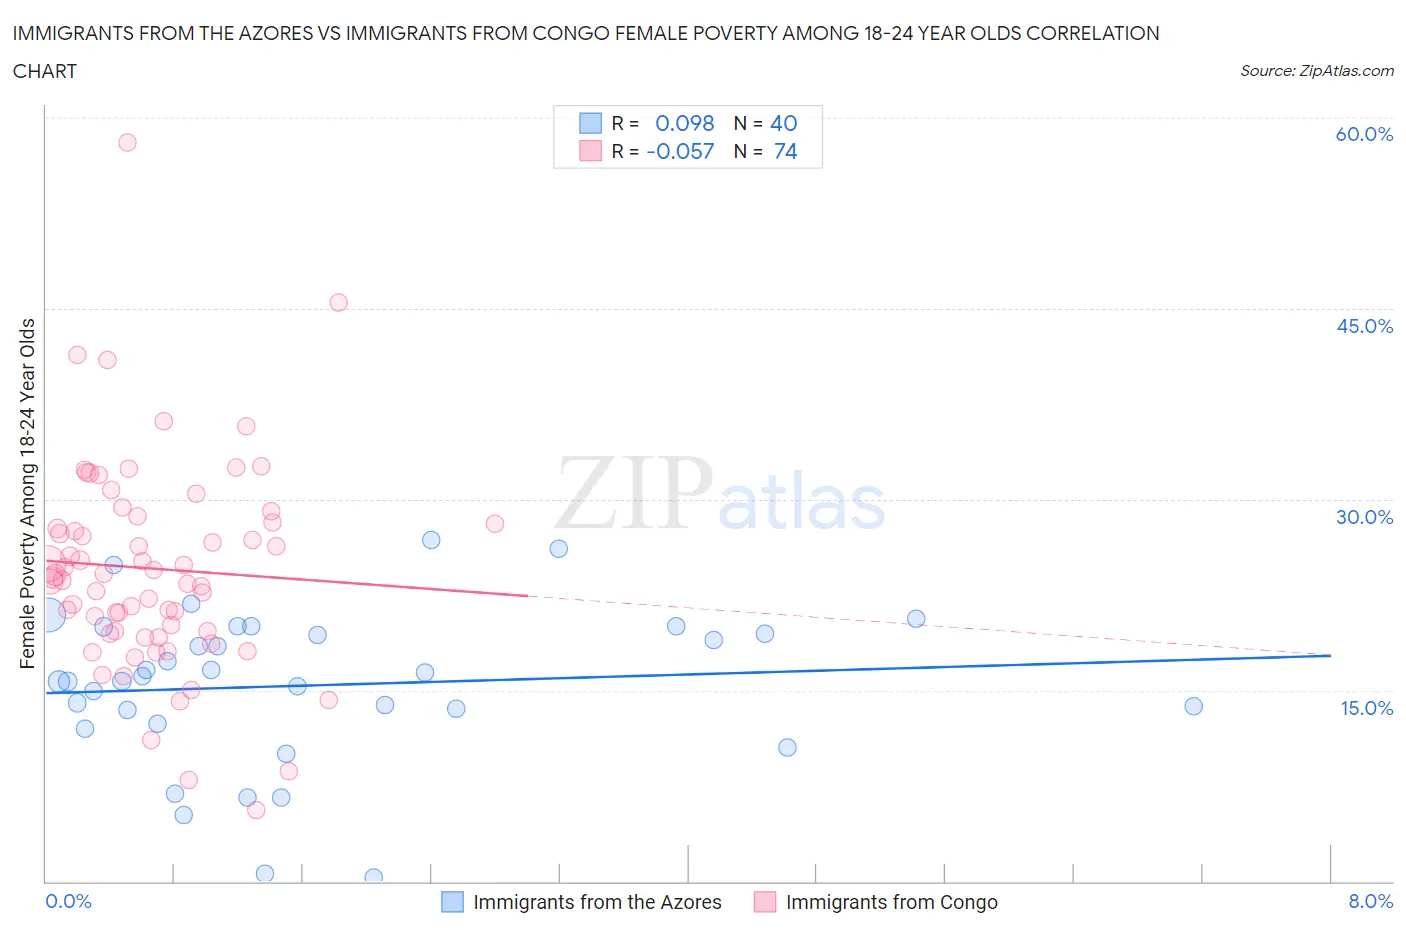 Immigrants from the Azores vs Immigrants from Congo Female Poverty Among 18-24 Year Olds